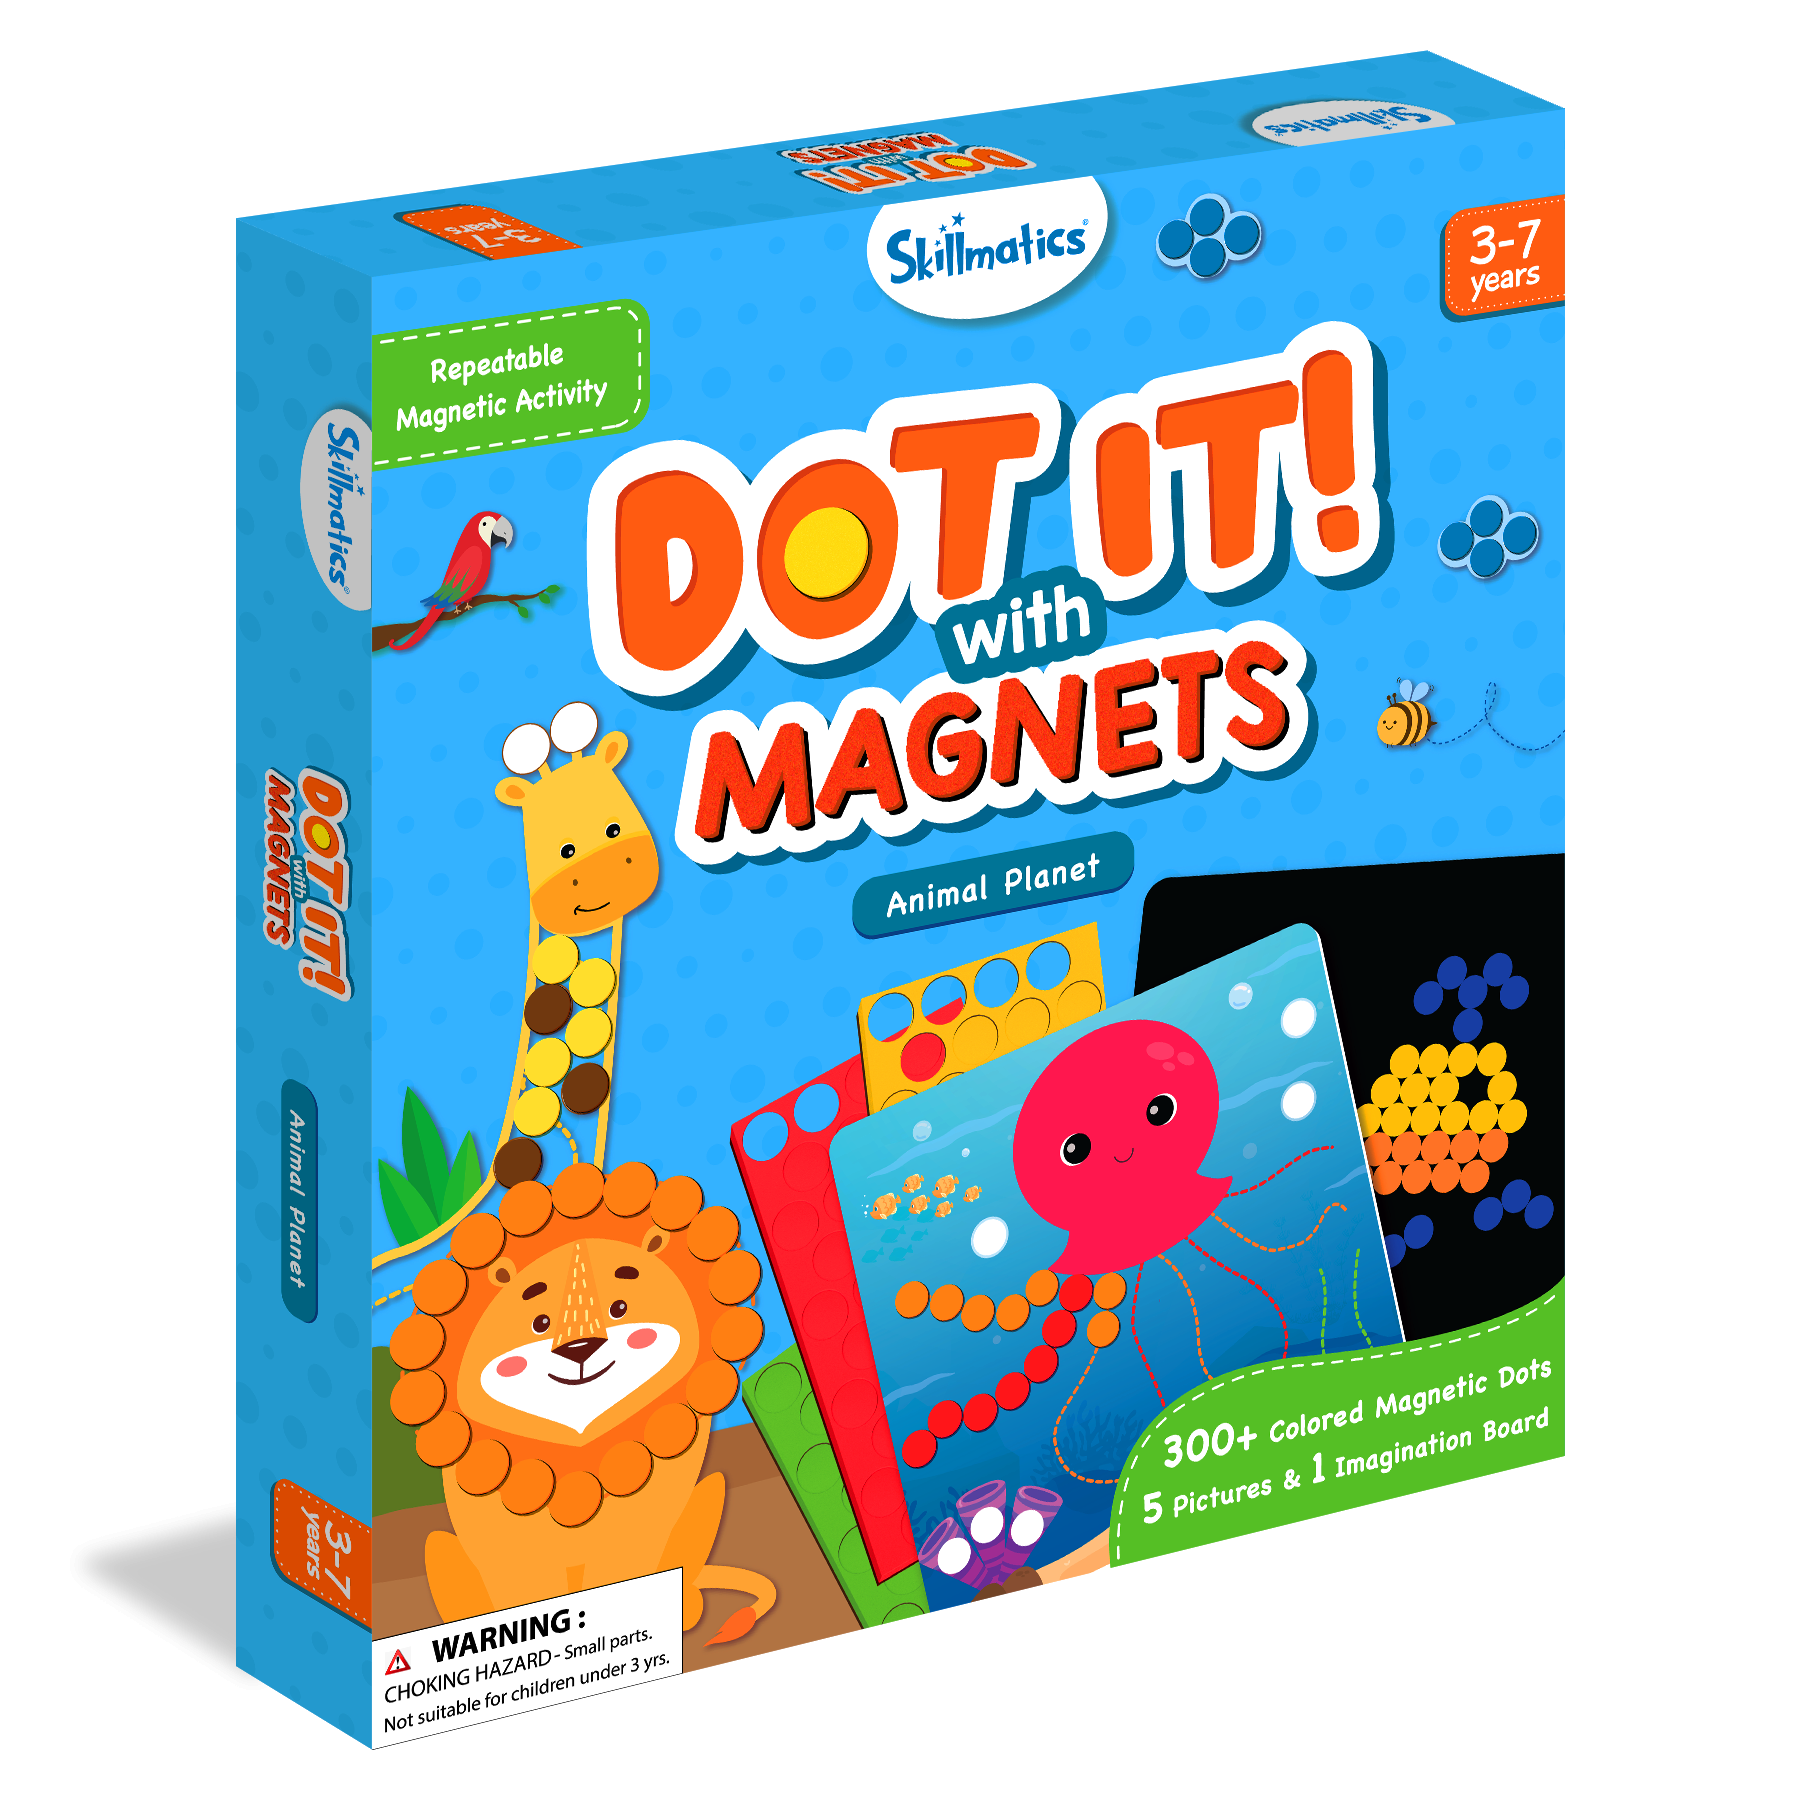 Skillmatics Art Activity Dot It with Magnets - Animals, No Mess Repeatable Art for Kids, Craft Kits, DIY Activity, Gifts for Ages 4 to 7